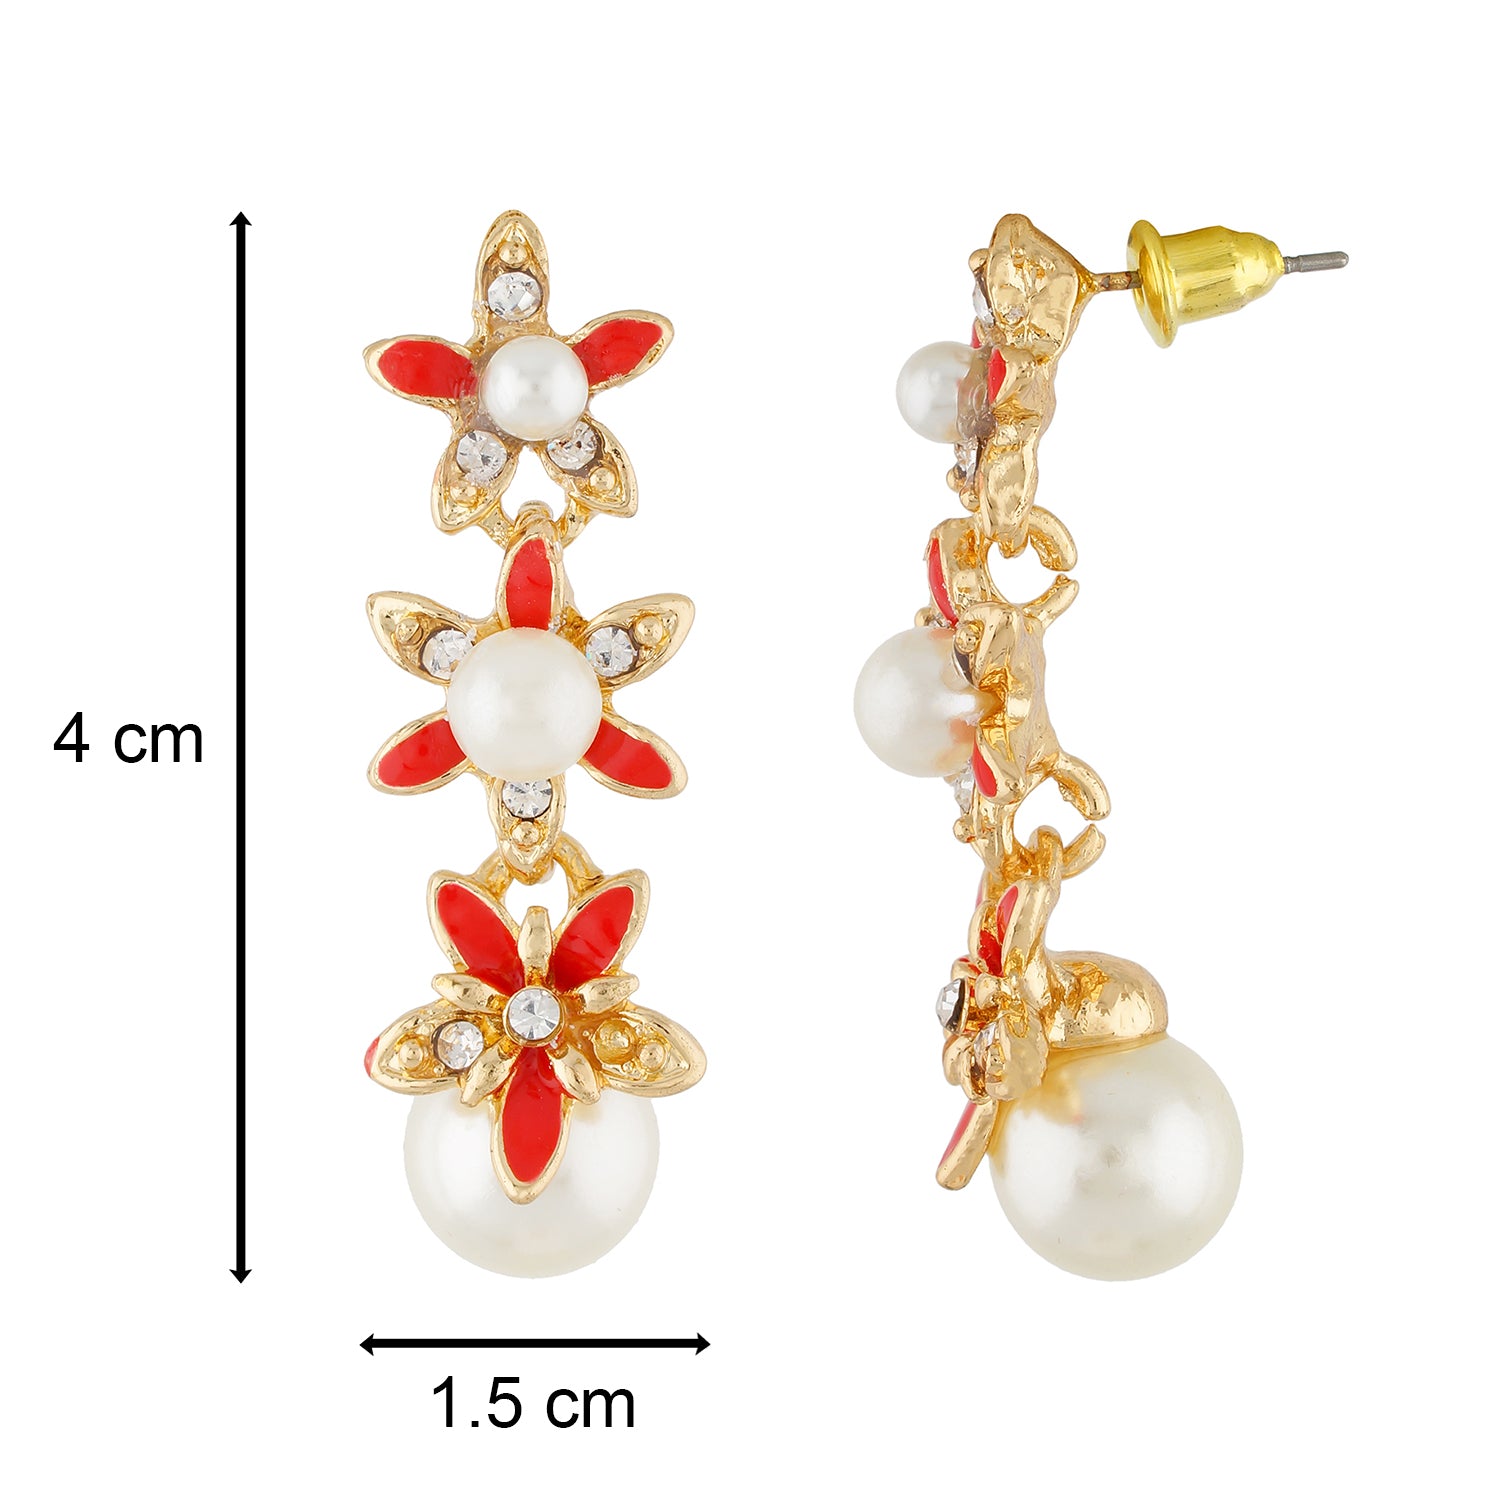 Debonair Red and Gold Colour Floral design Enamel Enhanced Earring for Girls and Women